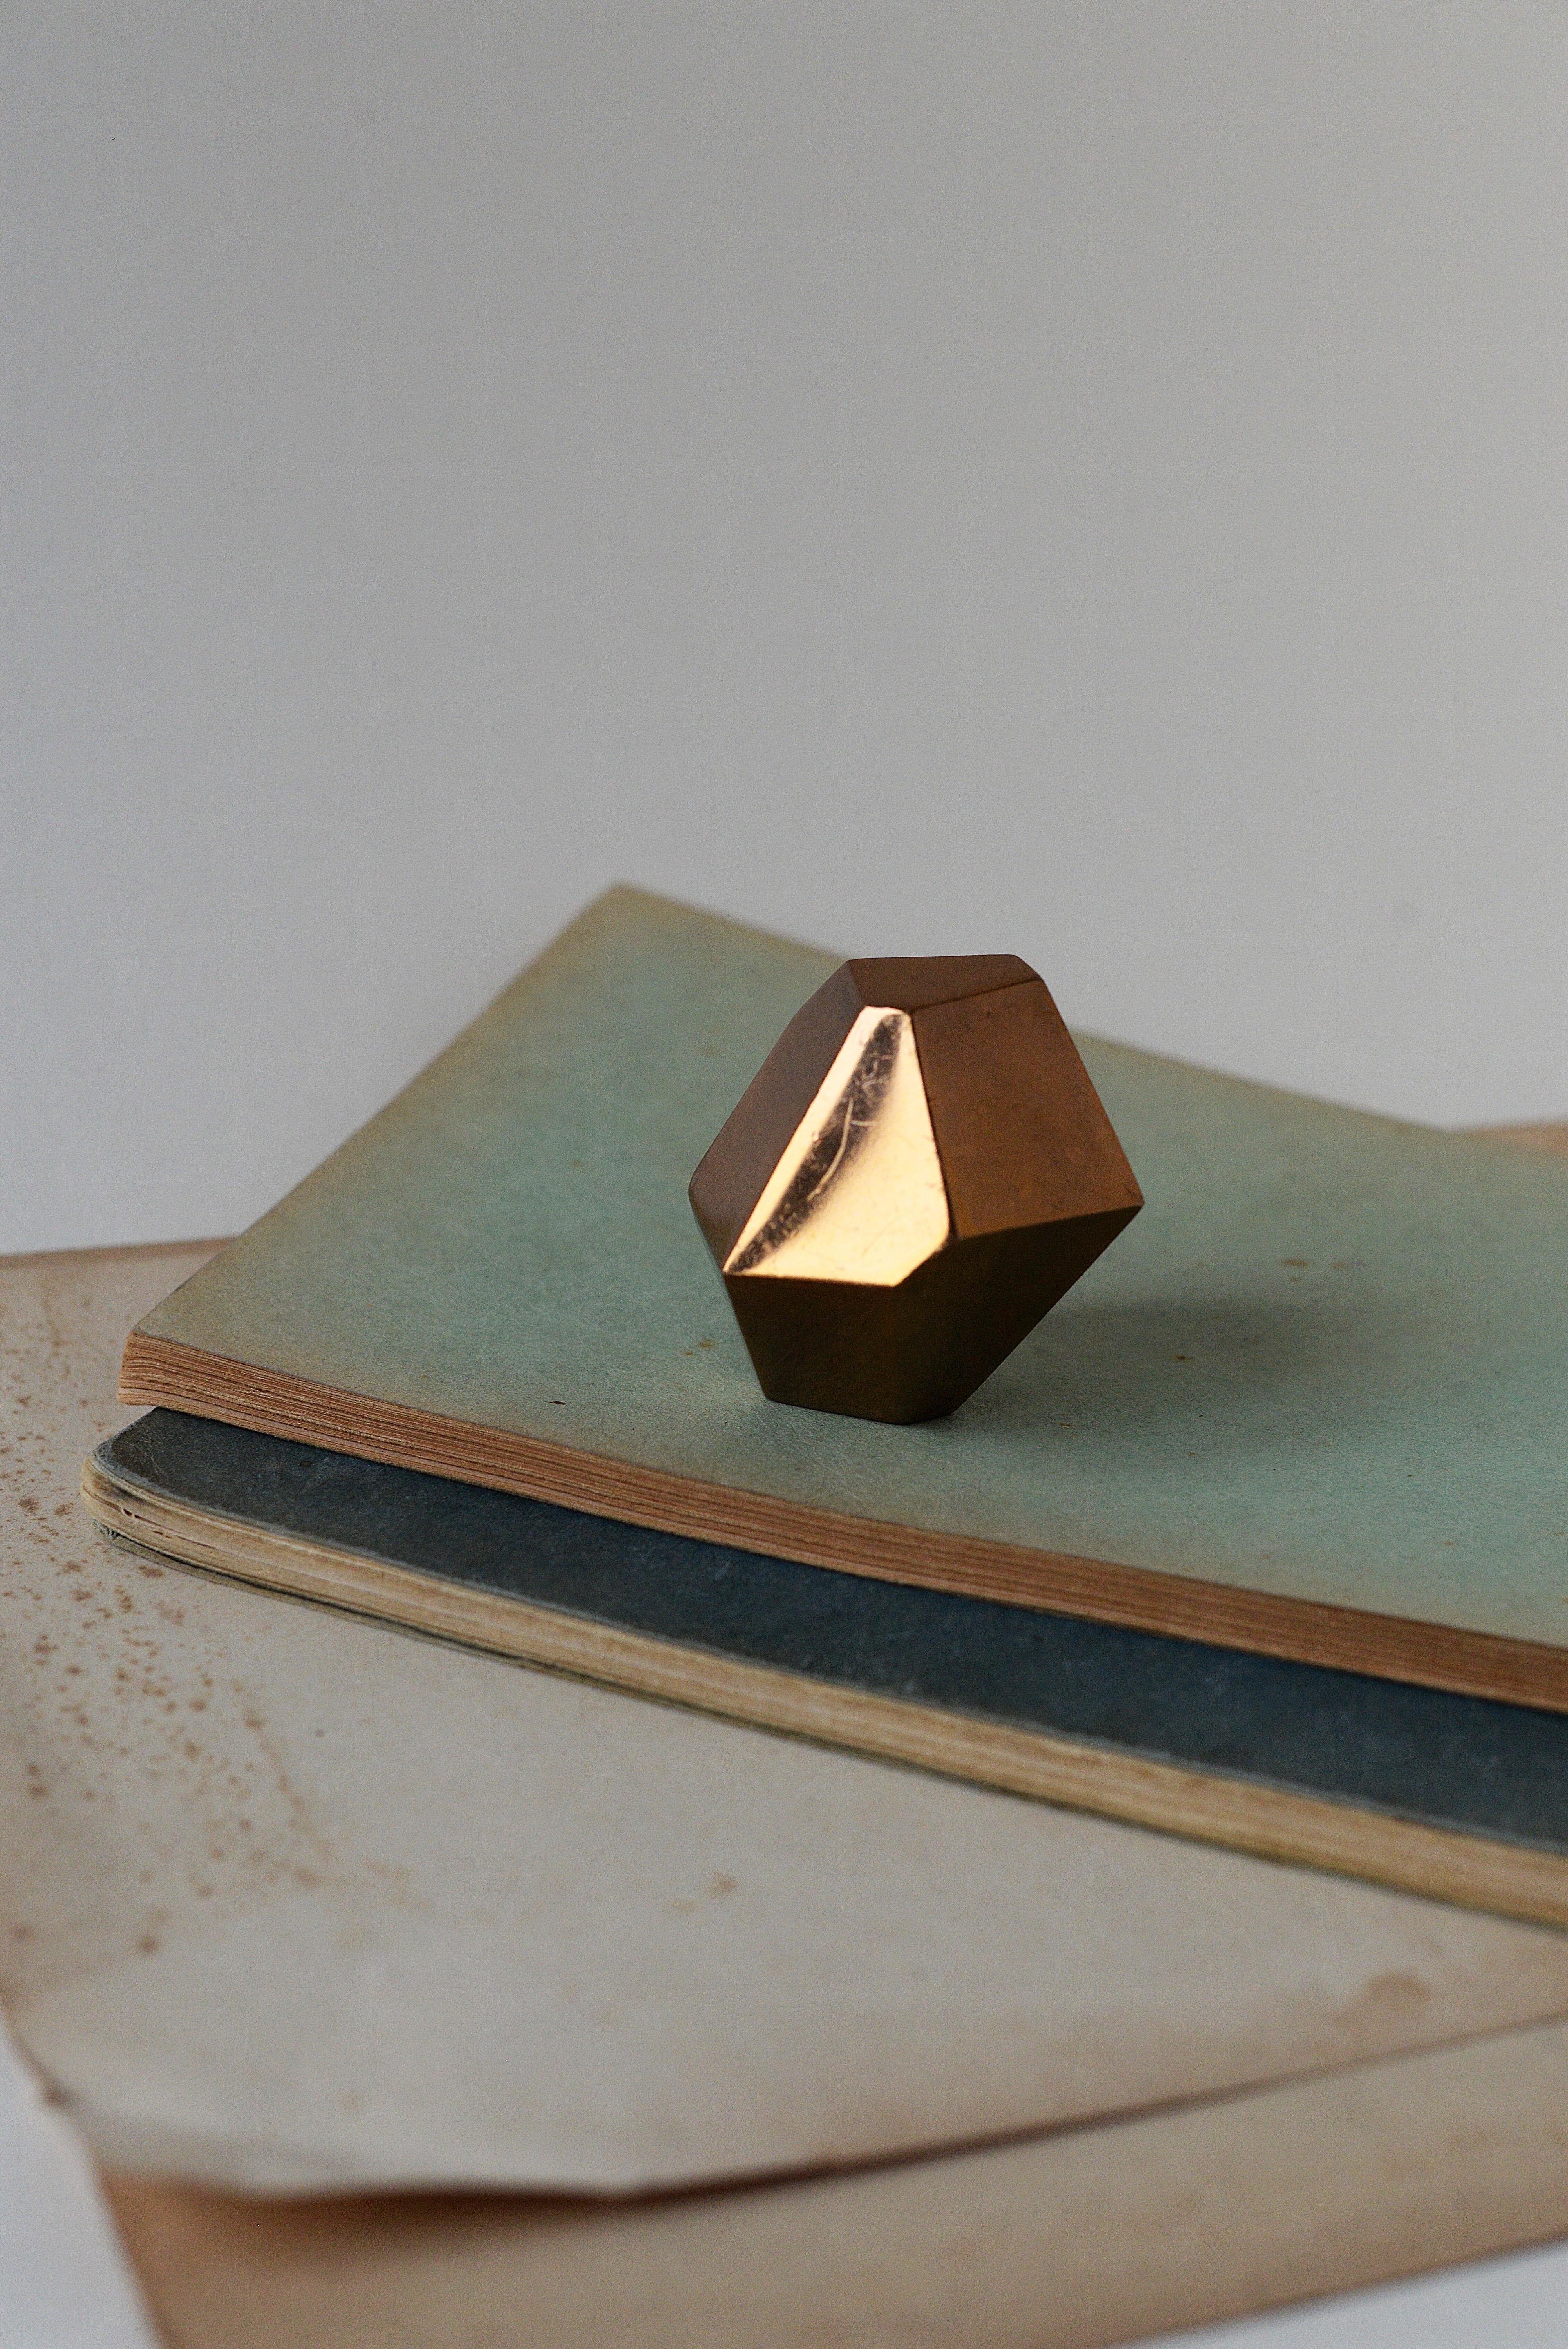 Faceted Bronze Geometric Paperweight, Brass-Plated, 1980s For Sale